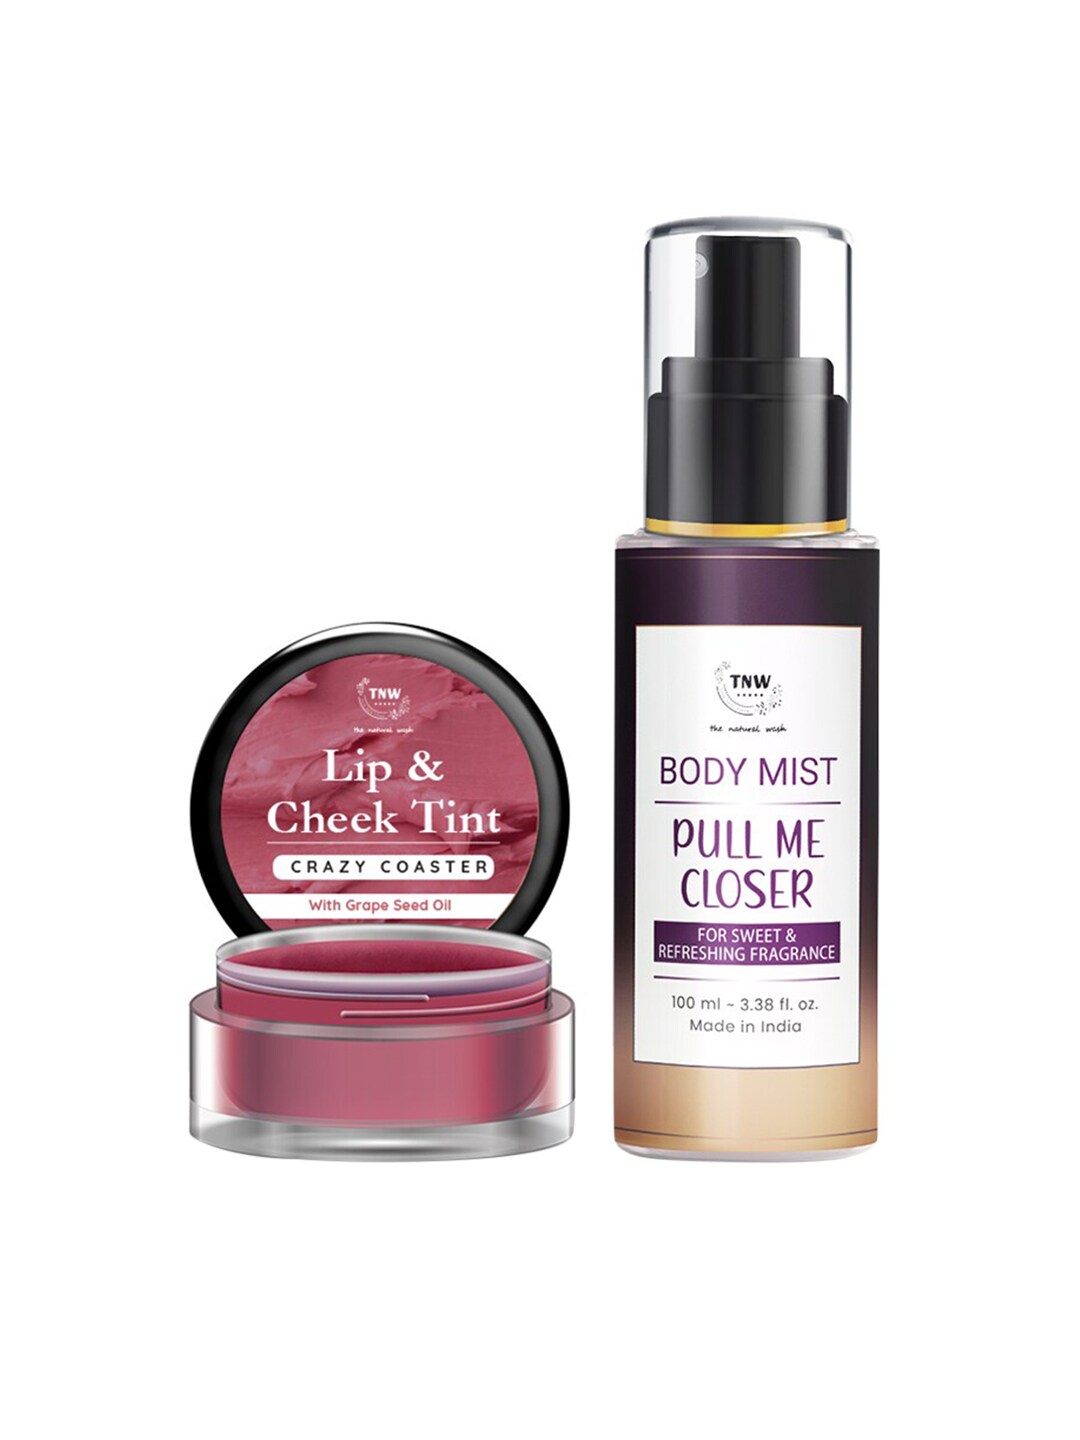 TNW the natural wash Crazy Coaster Lip & Cheek Tint - We Belong Together Body Mist Price in India